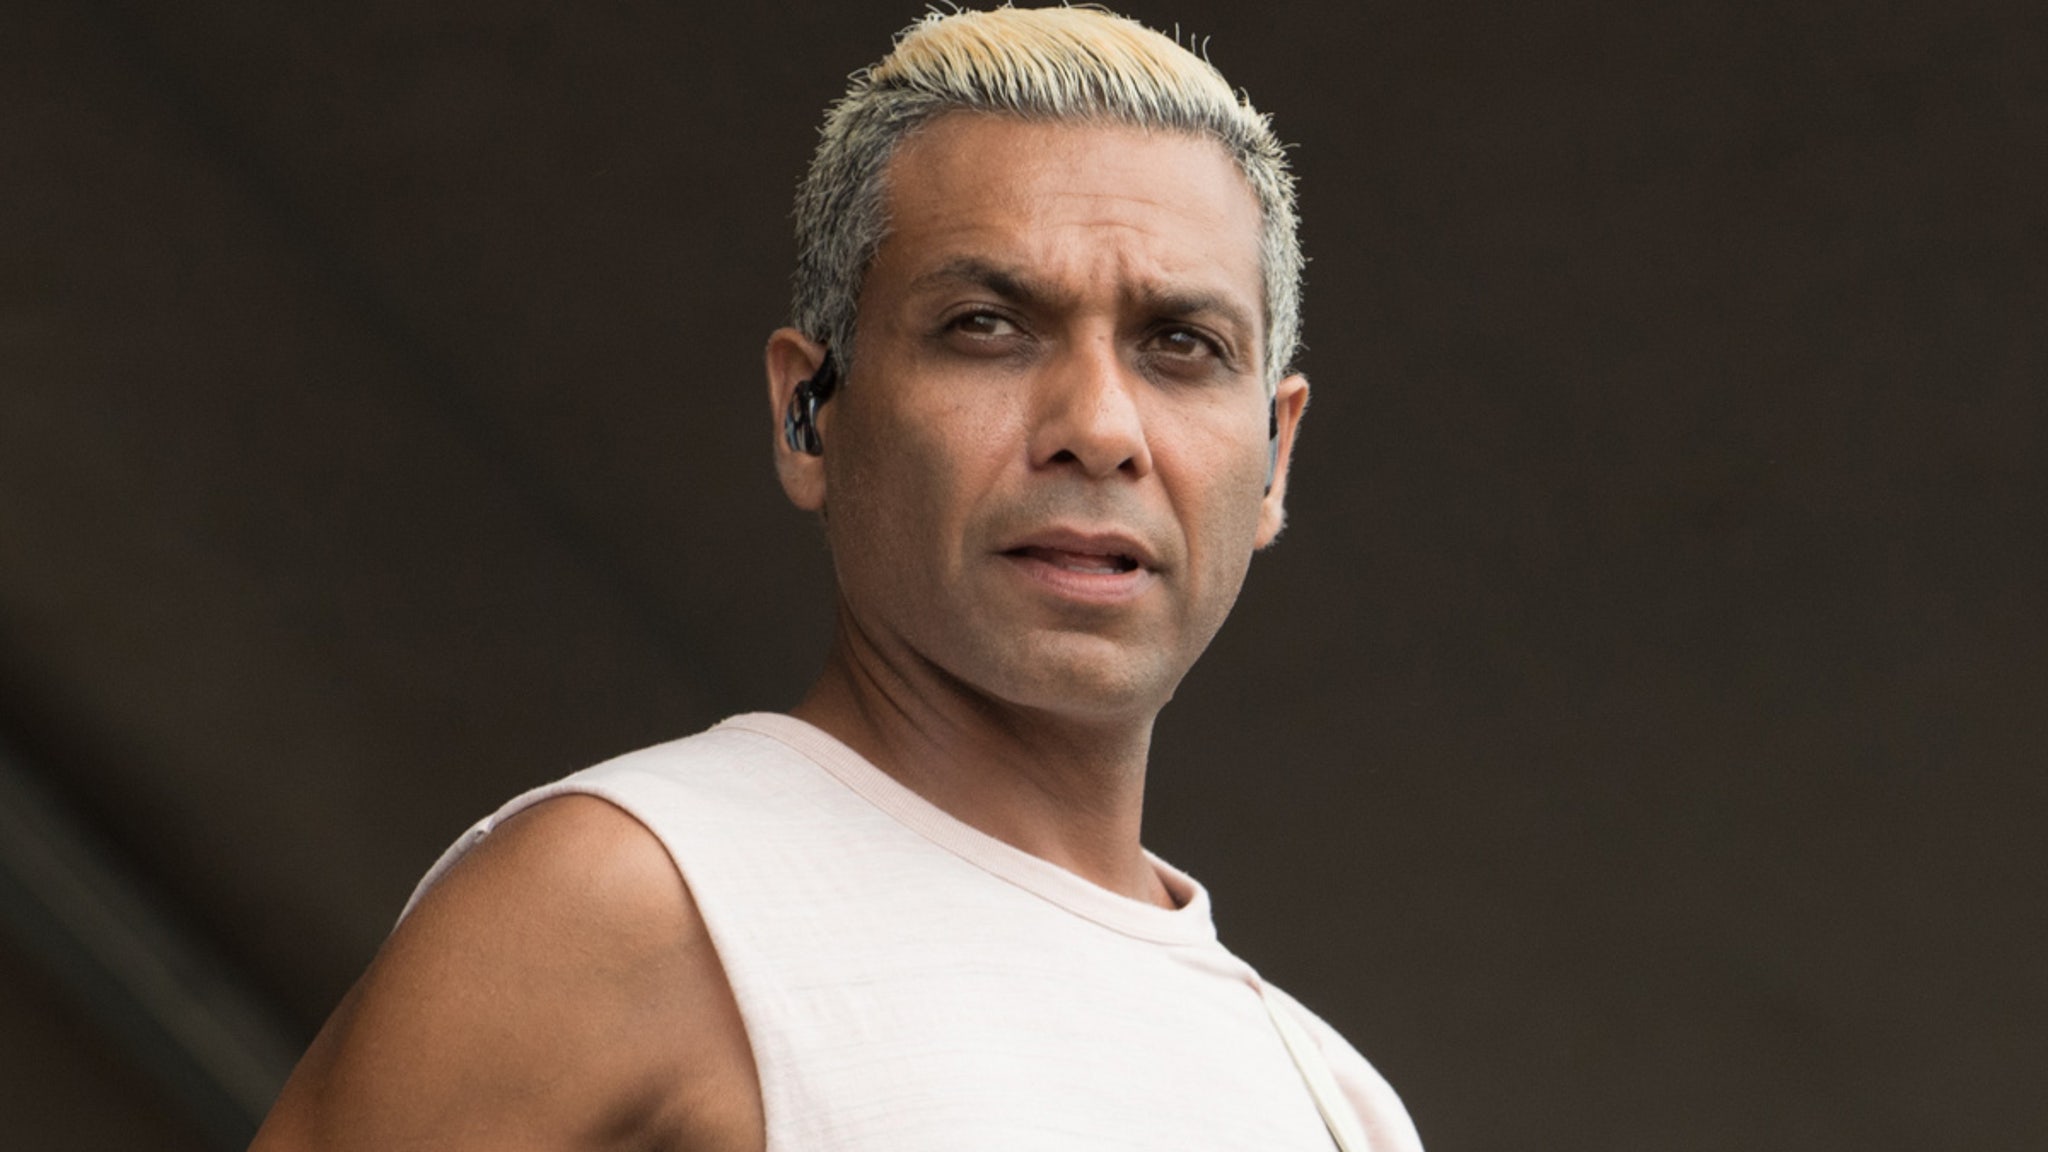 No Doubt’s Tony Kanal TRO Against Trespasser Who Believes Heath Ledger is Still There